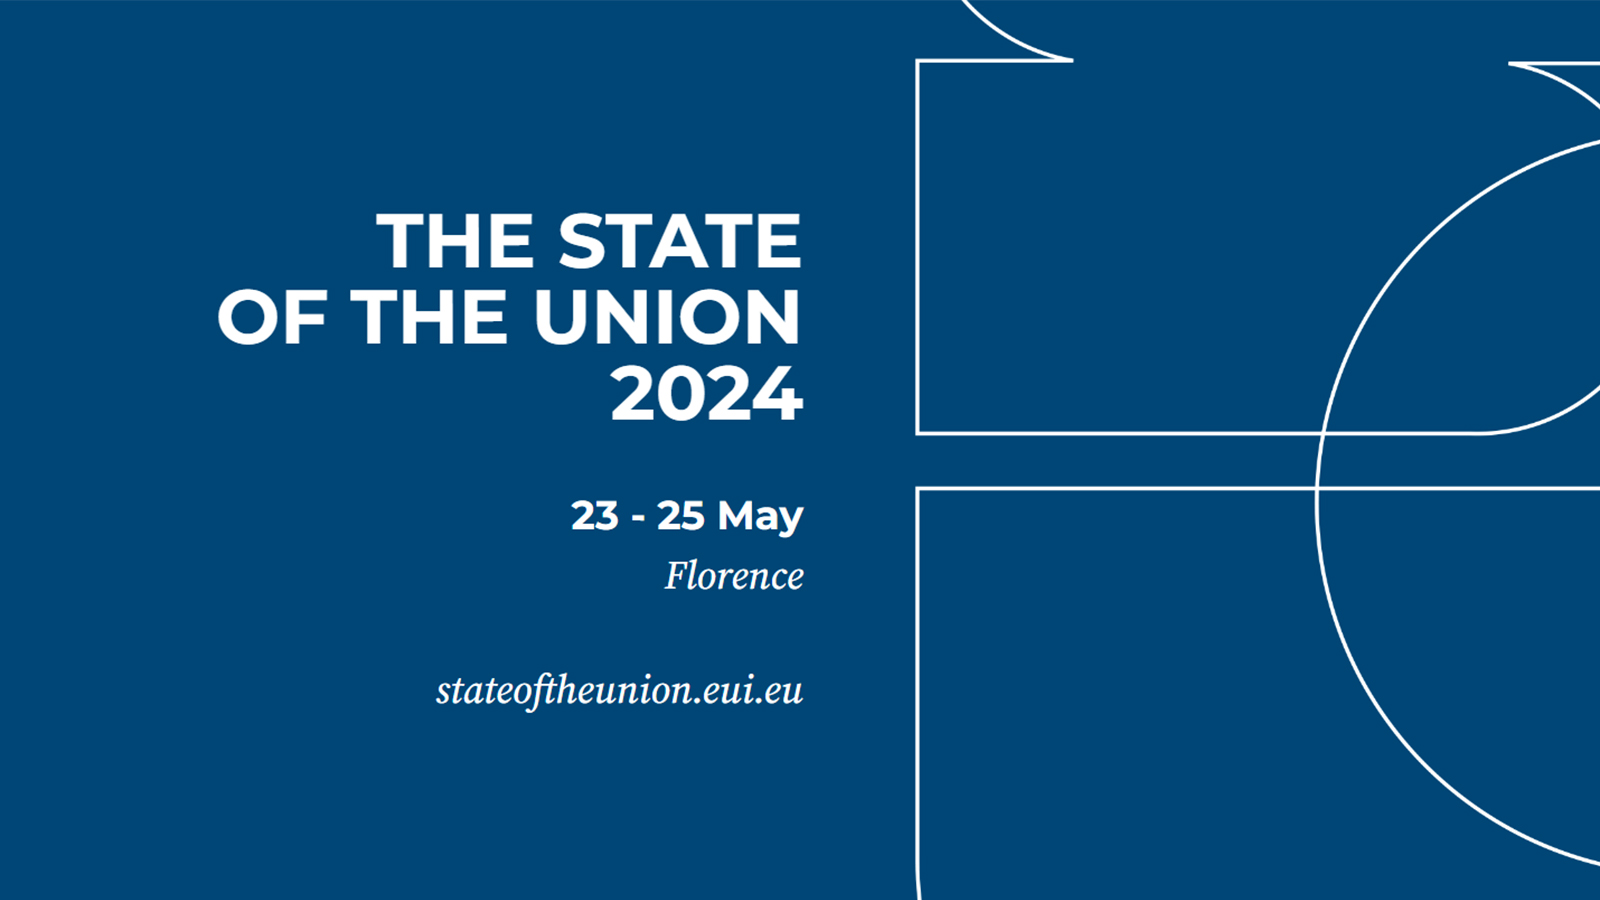 14th edition of "The State of the Union"